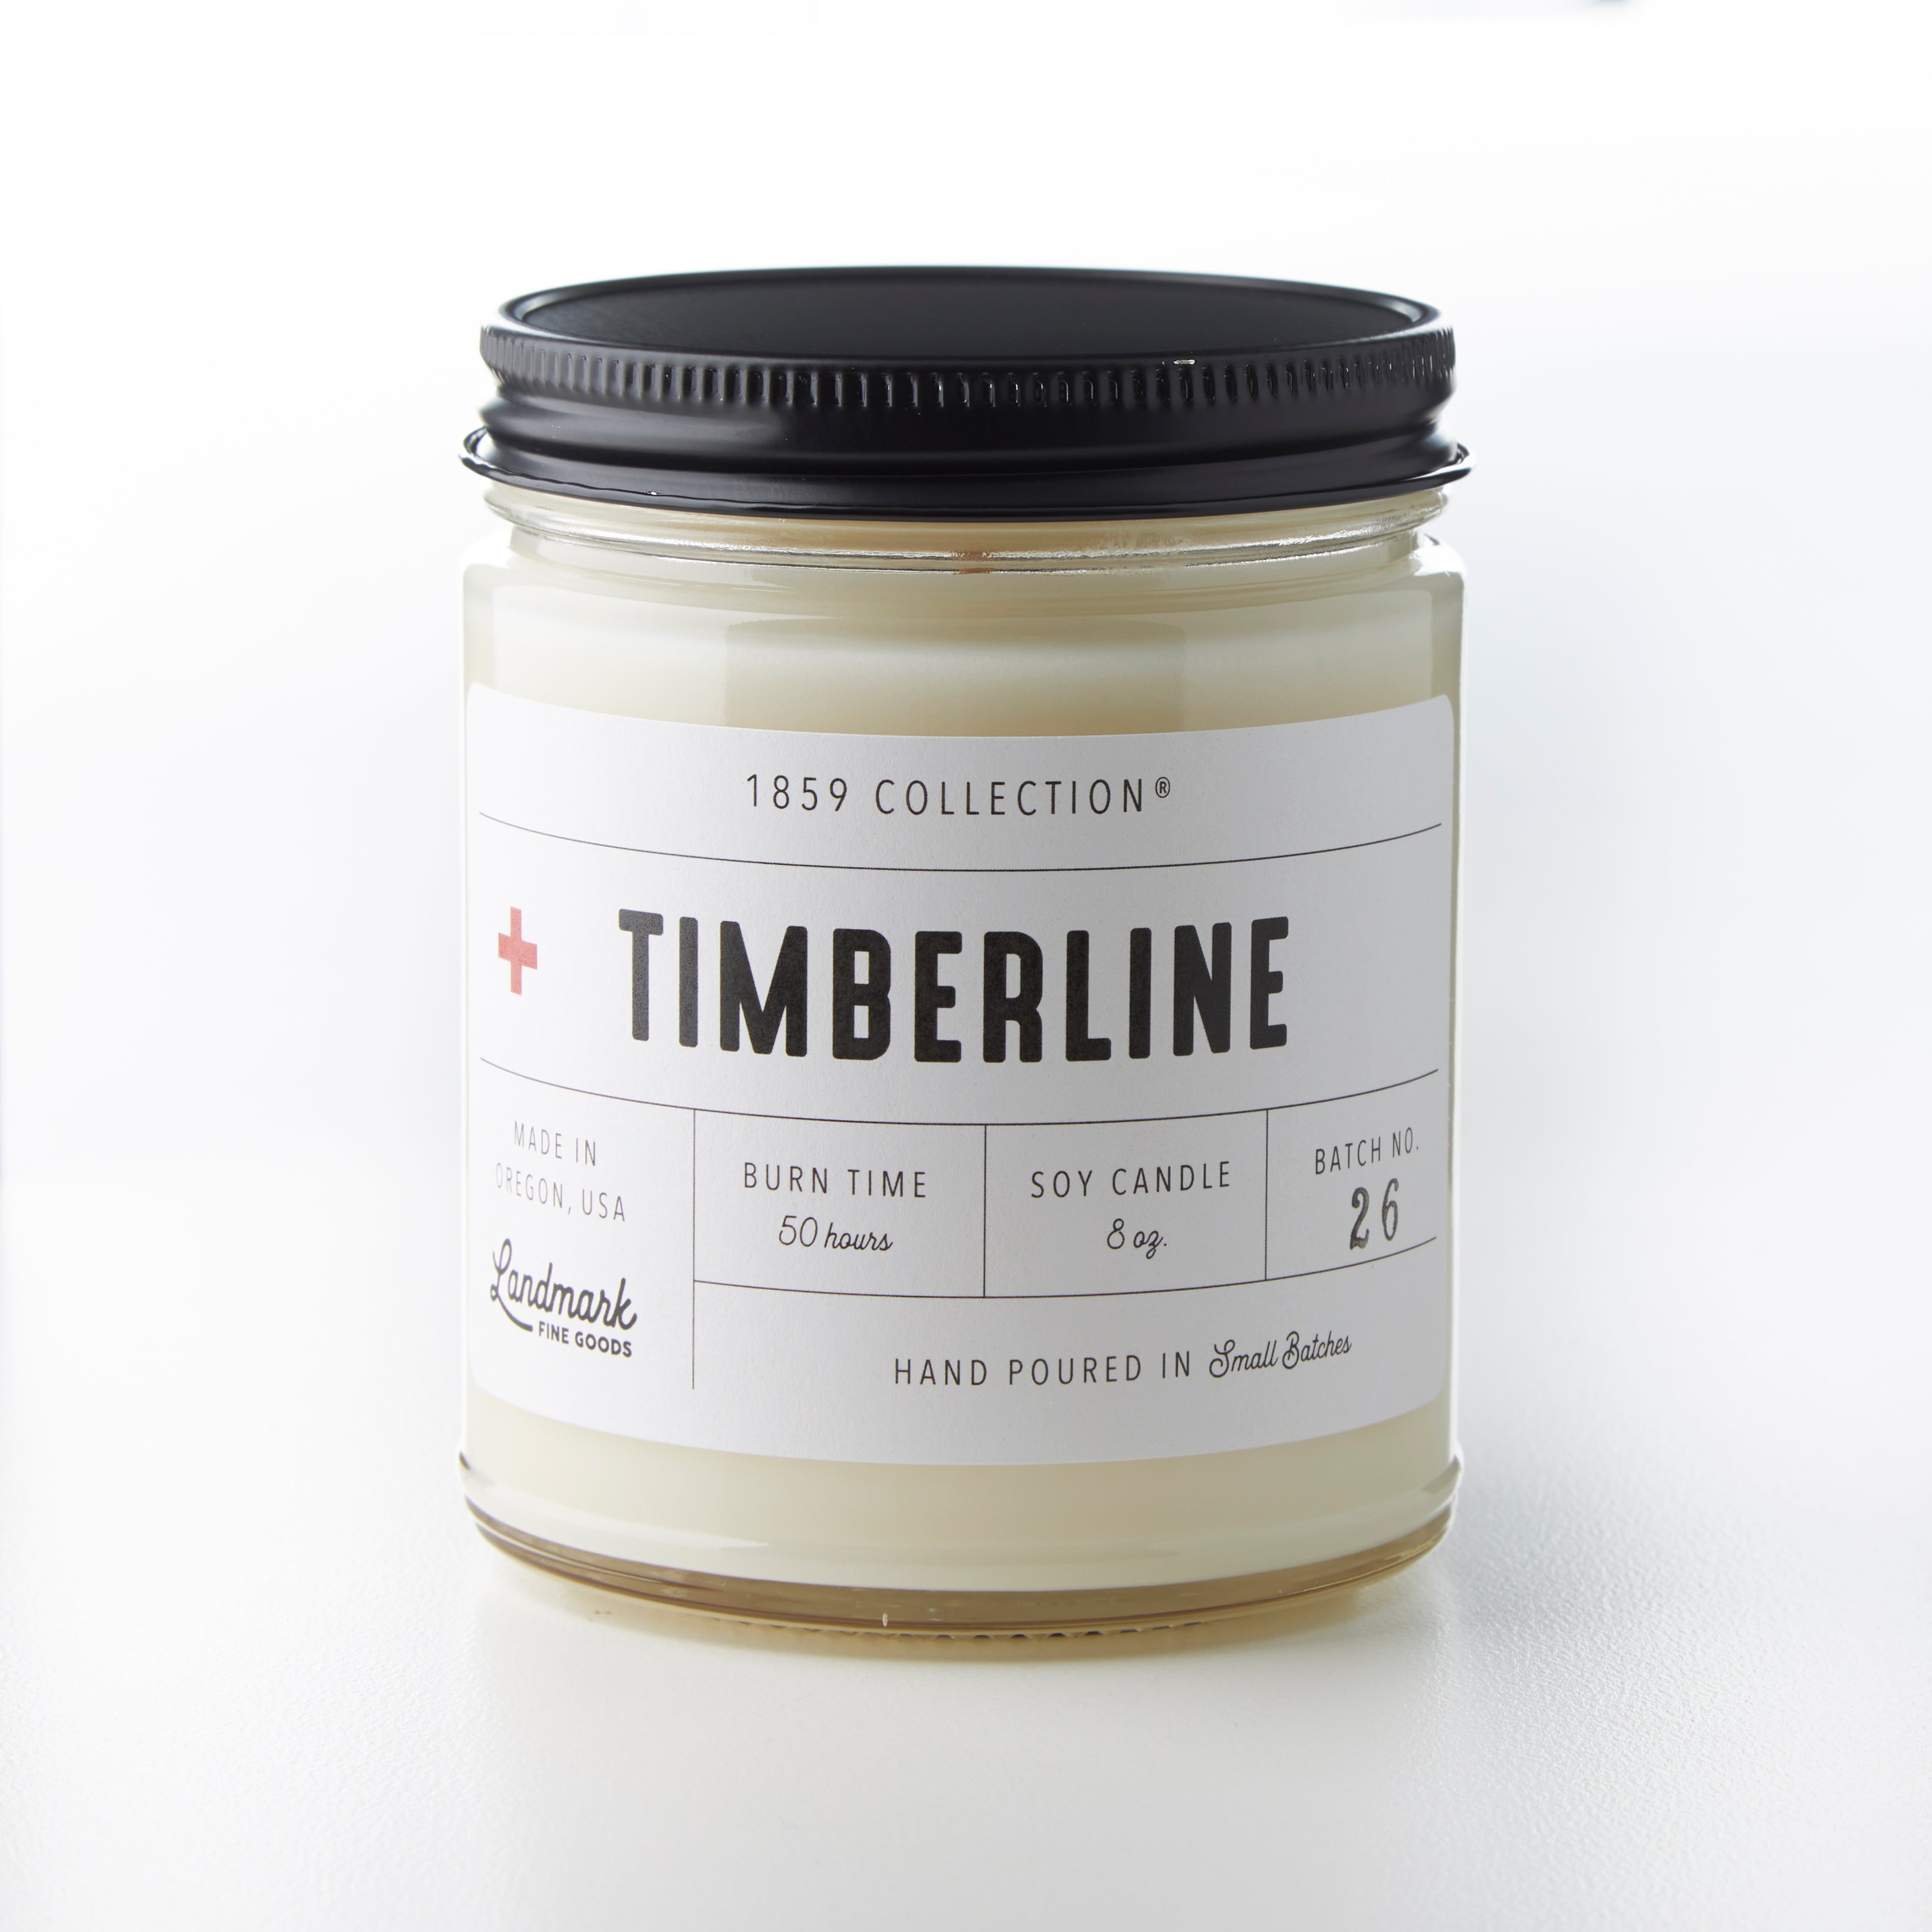 Timberline Candle - 1859 Collection®